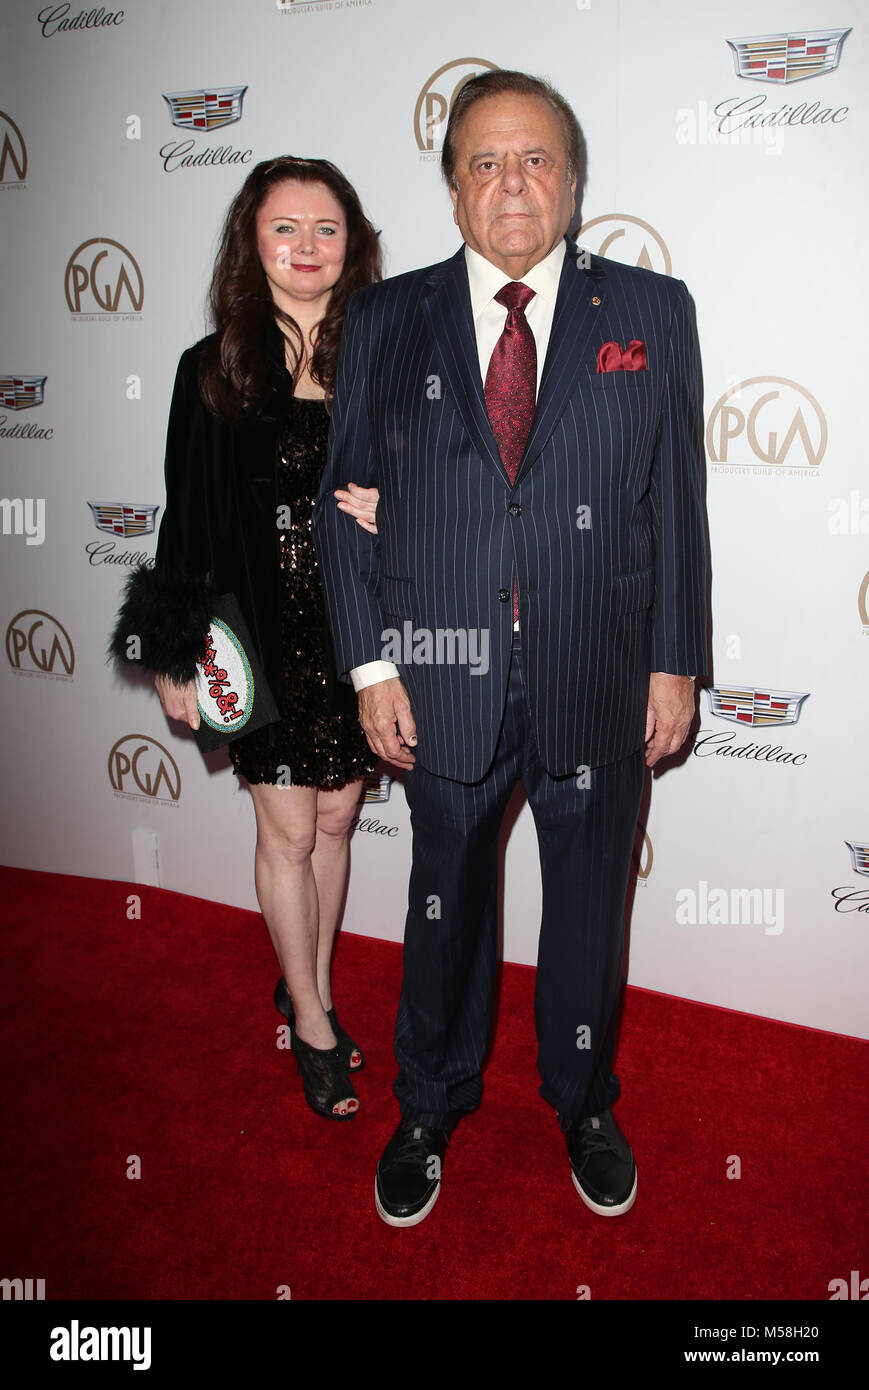 29th Annual Producers Guild Awards, held at The Beverly Hilton Hotel in Beverly Hills, California.  Featuring: Amanda Sorvino, Paul Sorvino Where: Beverly Hills, California, United States When: 20 Jan 2018 Credit: FayesVision/WENN.com Stock Photo